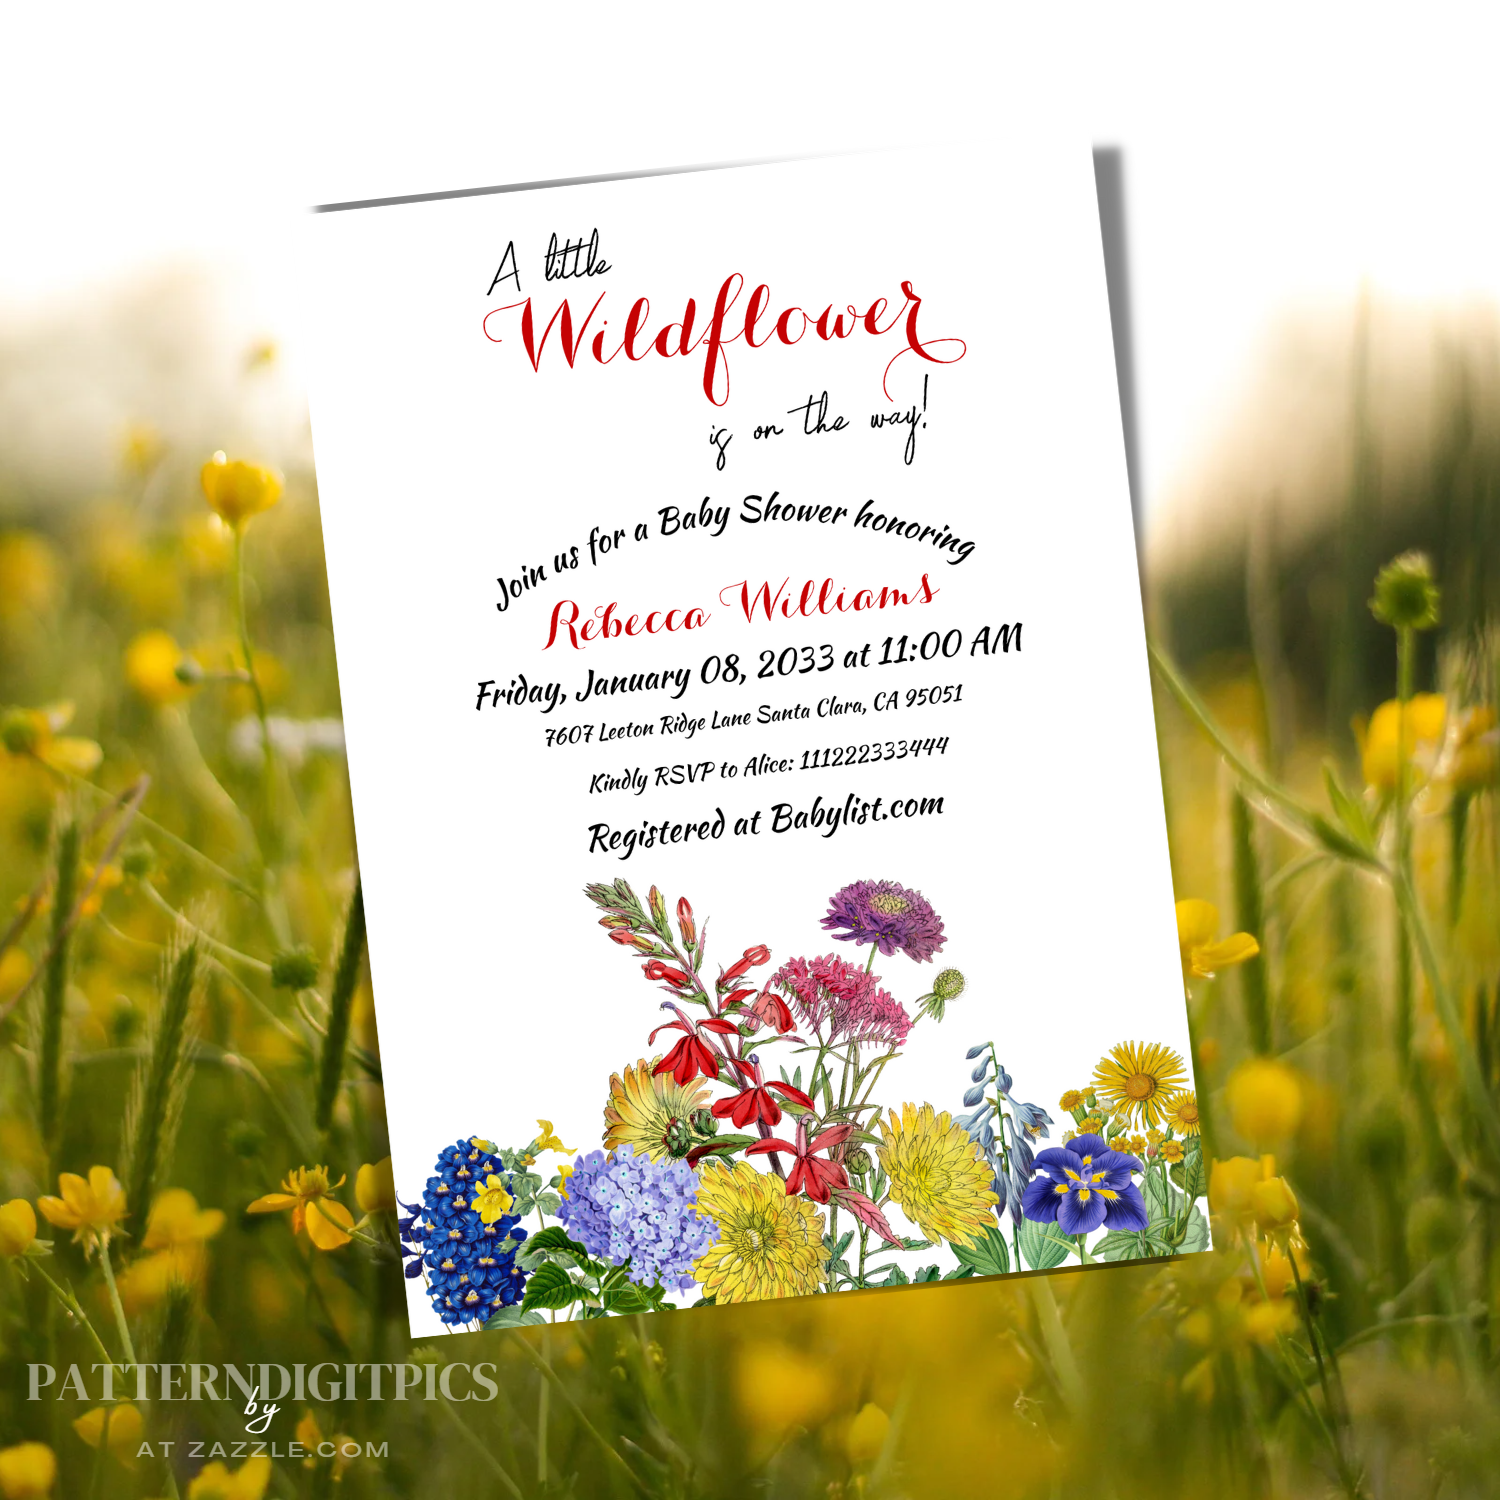 Watercolor Floral Bouquet of Flowers Baby Shower Theme Baby in Bloom invitation with text "A little Wildflower is on the way!" with wild red, blue, yellow, green and pink colors and yellow flowers field on the background